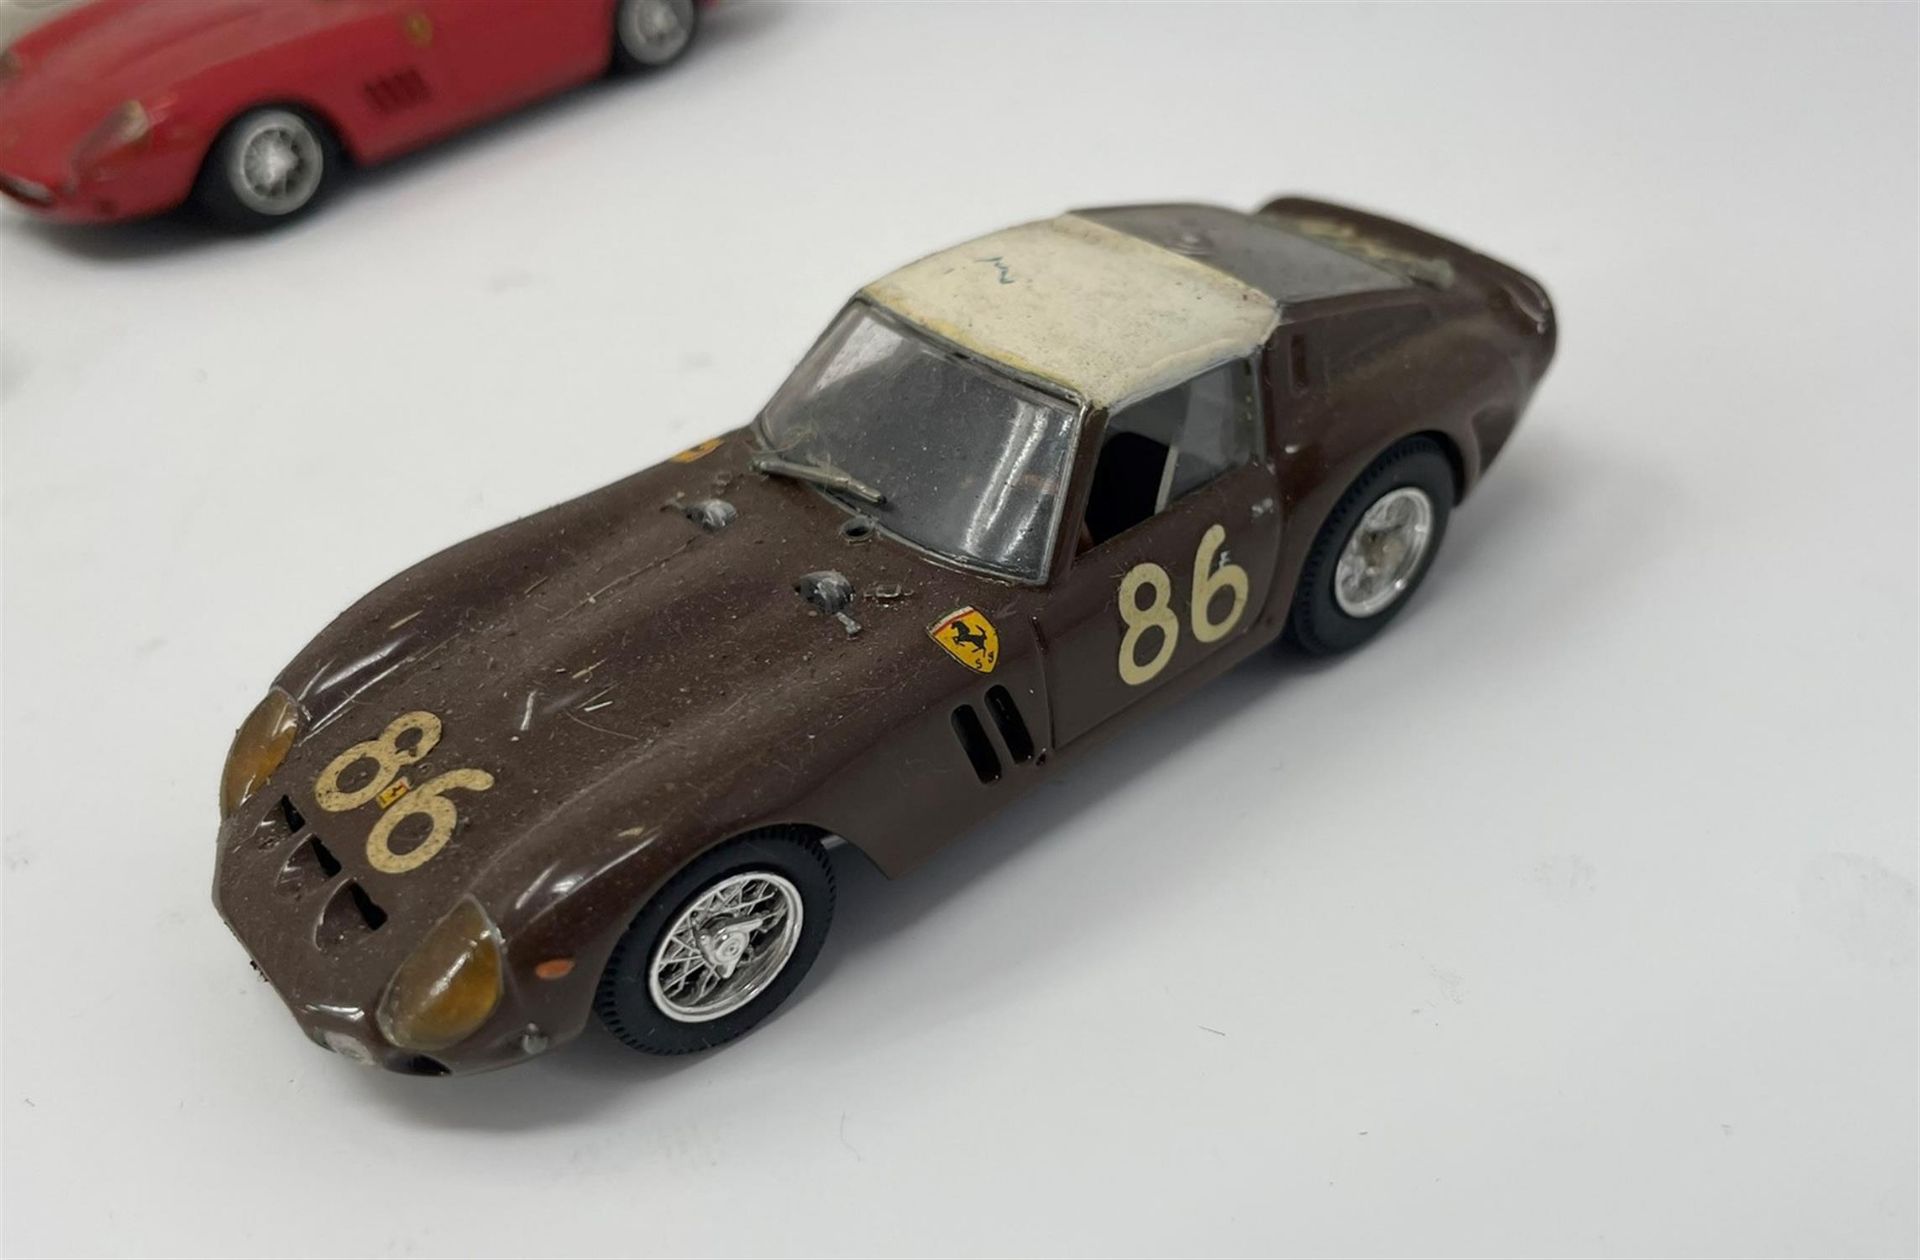 A Dozen 1/43rd Scale Classic Model Cars From the 1950s, 60s and 70s - Image 4 of 10